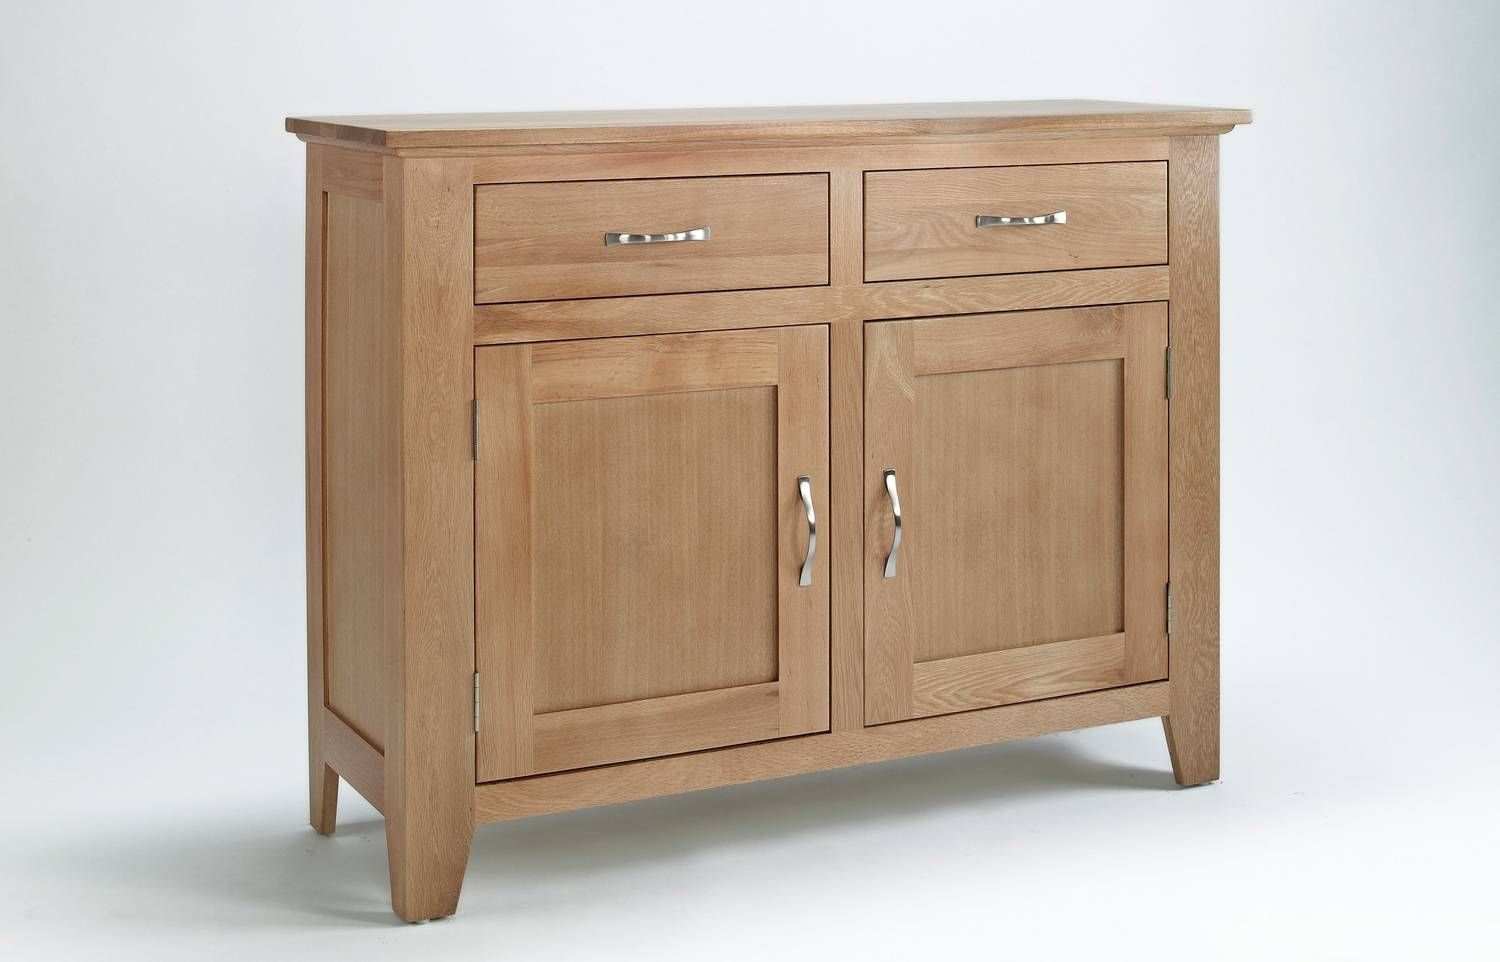 Oak Sideboard Cabinet | Bar Cabinet Inside Small Sideboard With Drawers (View 19 of 20)